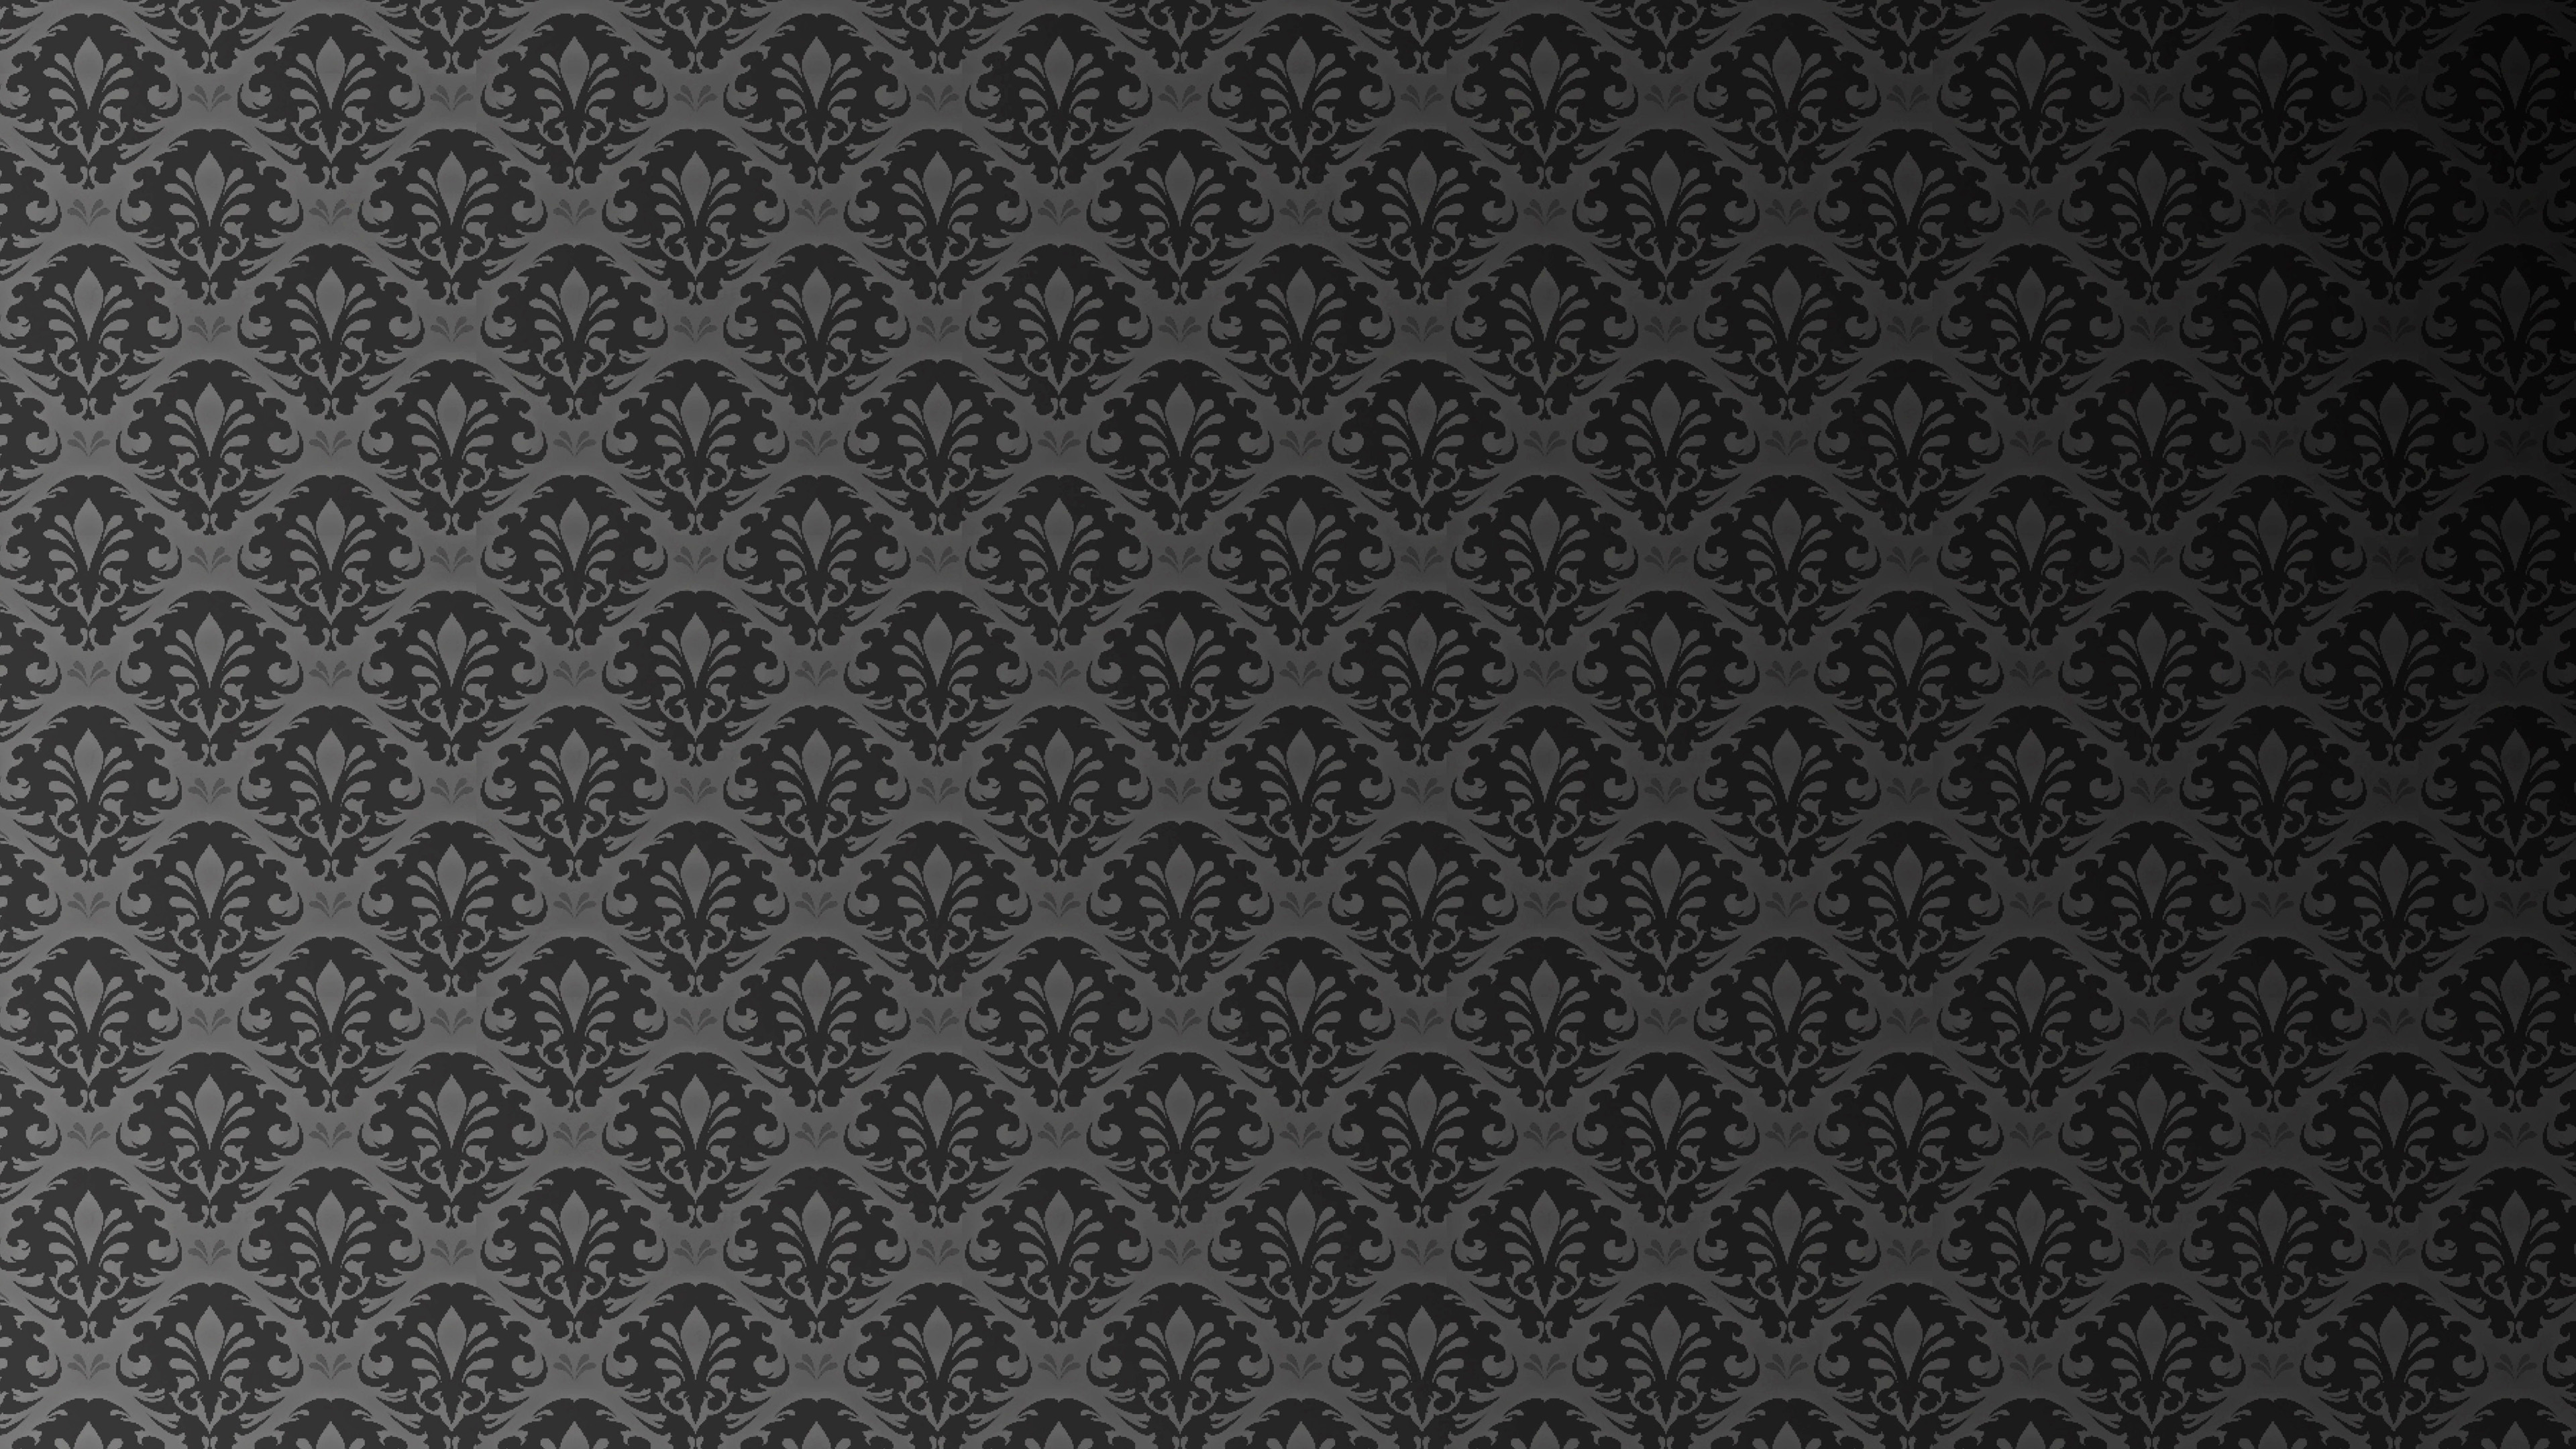 Black Floral Wallpaper For Walls in 4K - HD Wallpapers | Wallpapers